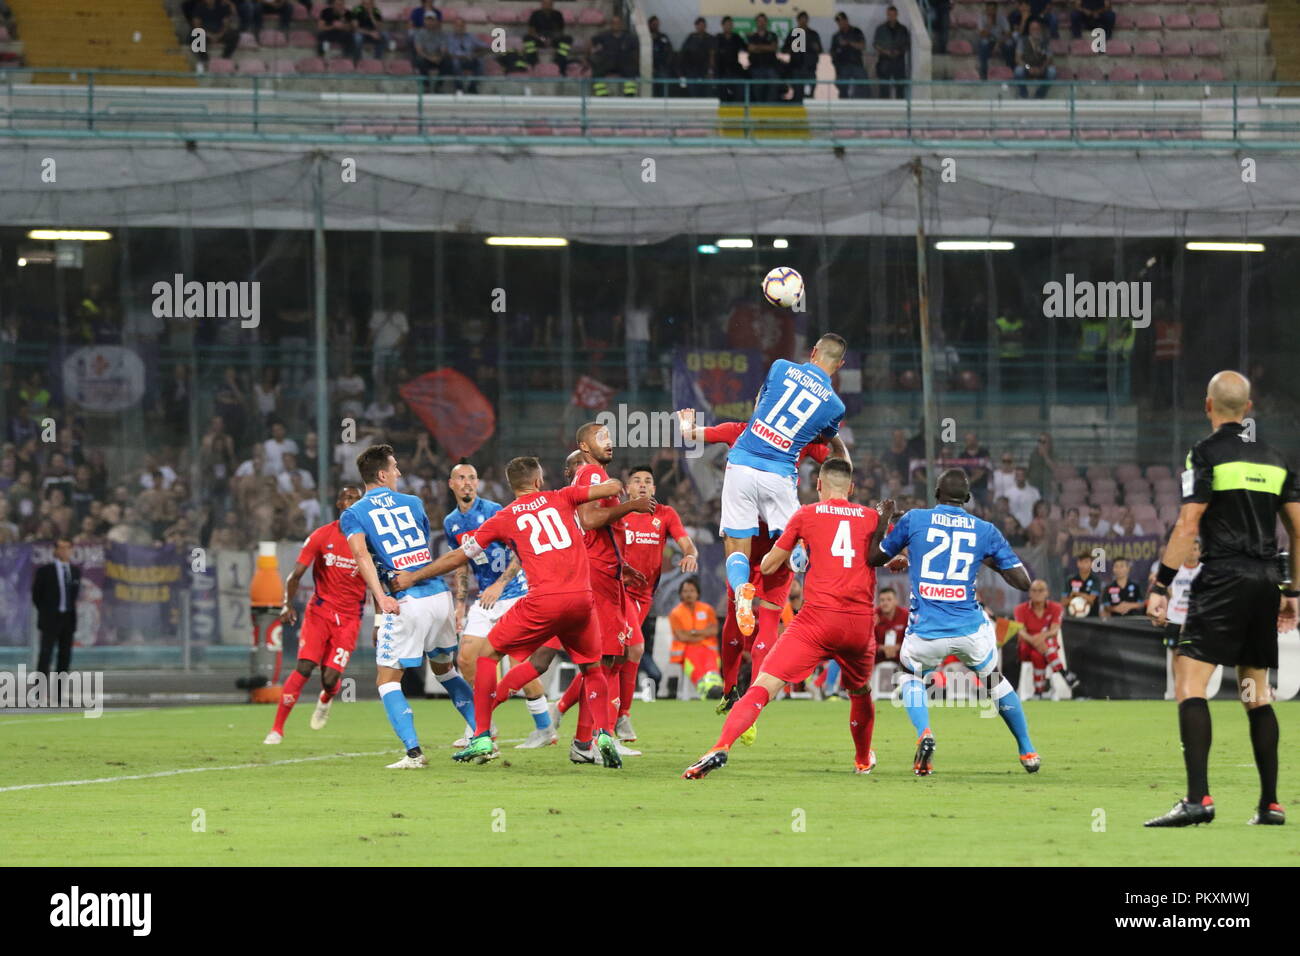 Naples, Italy. 15th September 2018. Stadium San Paolo Naples. 15th Sep, 2018. 09/15/2018 - Italy.In the picture Napoli player Maksimovic tries to make a goal to Fiorentina.final result SSC Napoli 1 AC Fiorentina 0. Credit: Fabio Sasso/ZUMA Wire/Alamy Live News Stock Photo